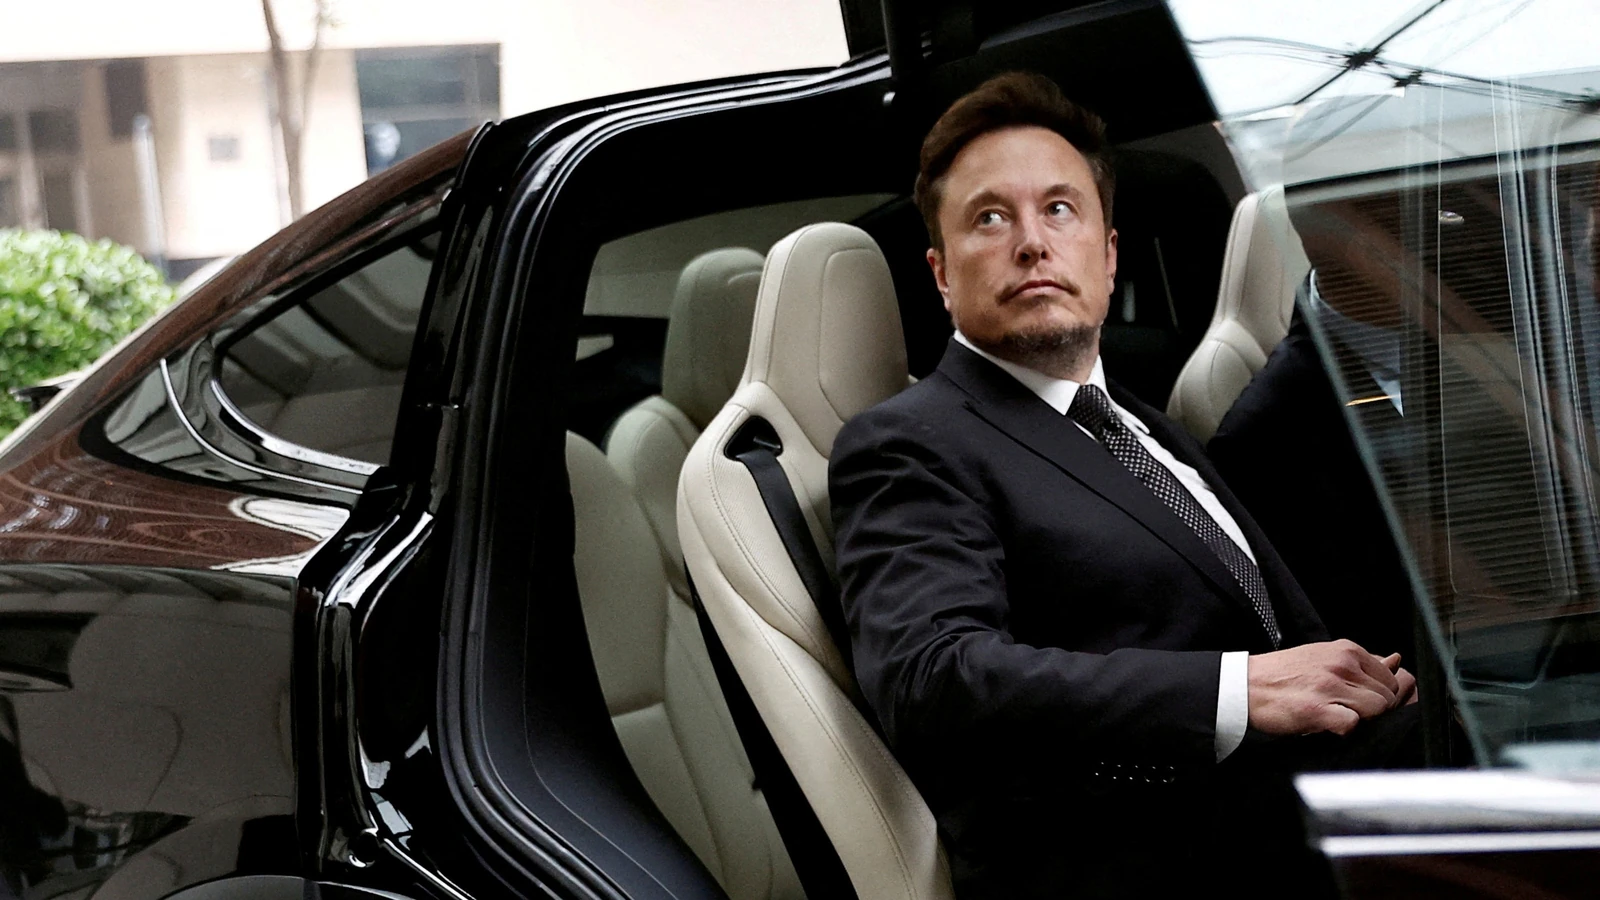 Tesla in Trouble? Top Execs Leave as Elon Musk Faces Big Challenges